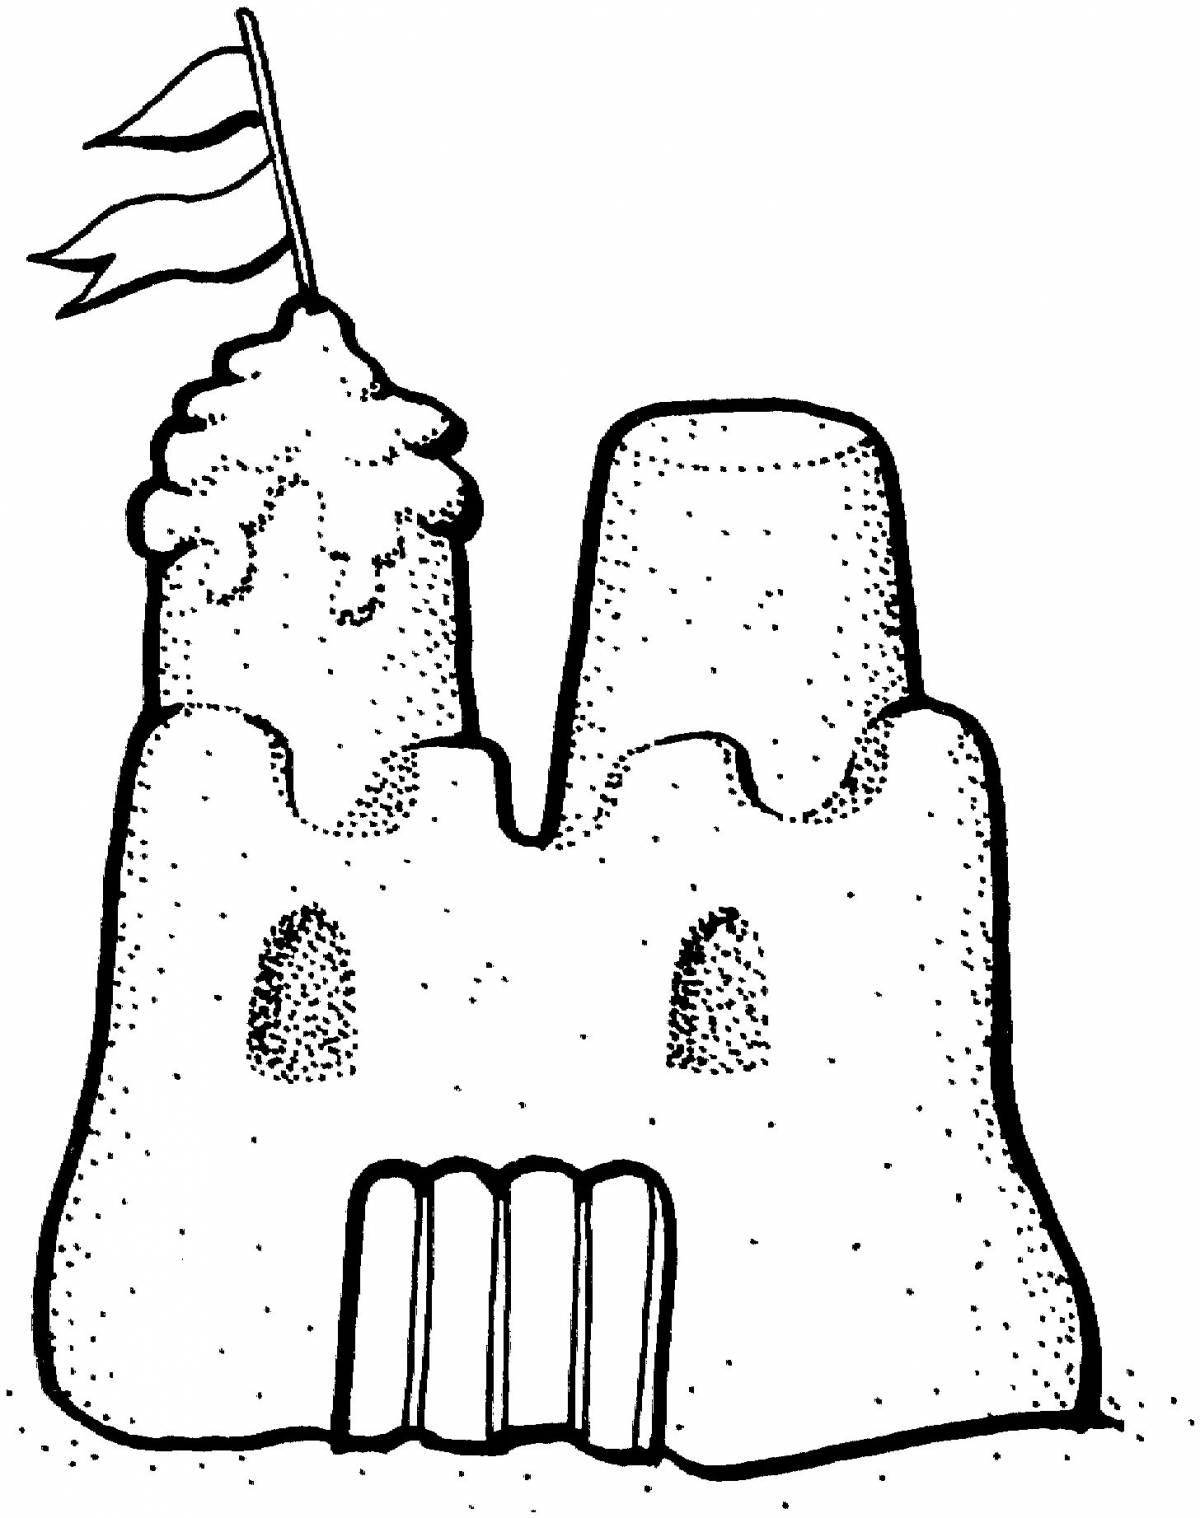 Creative snow castle coloring book for kids